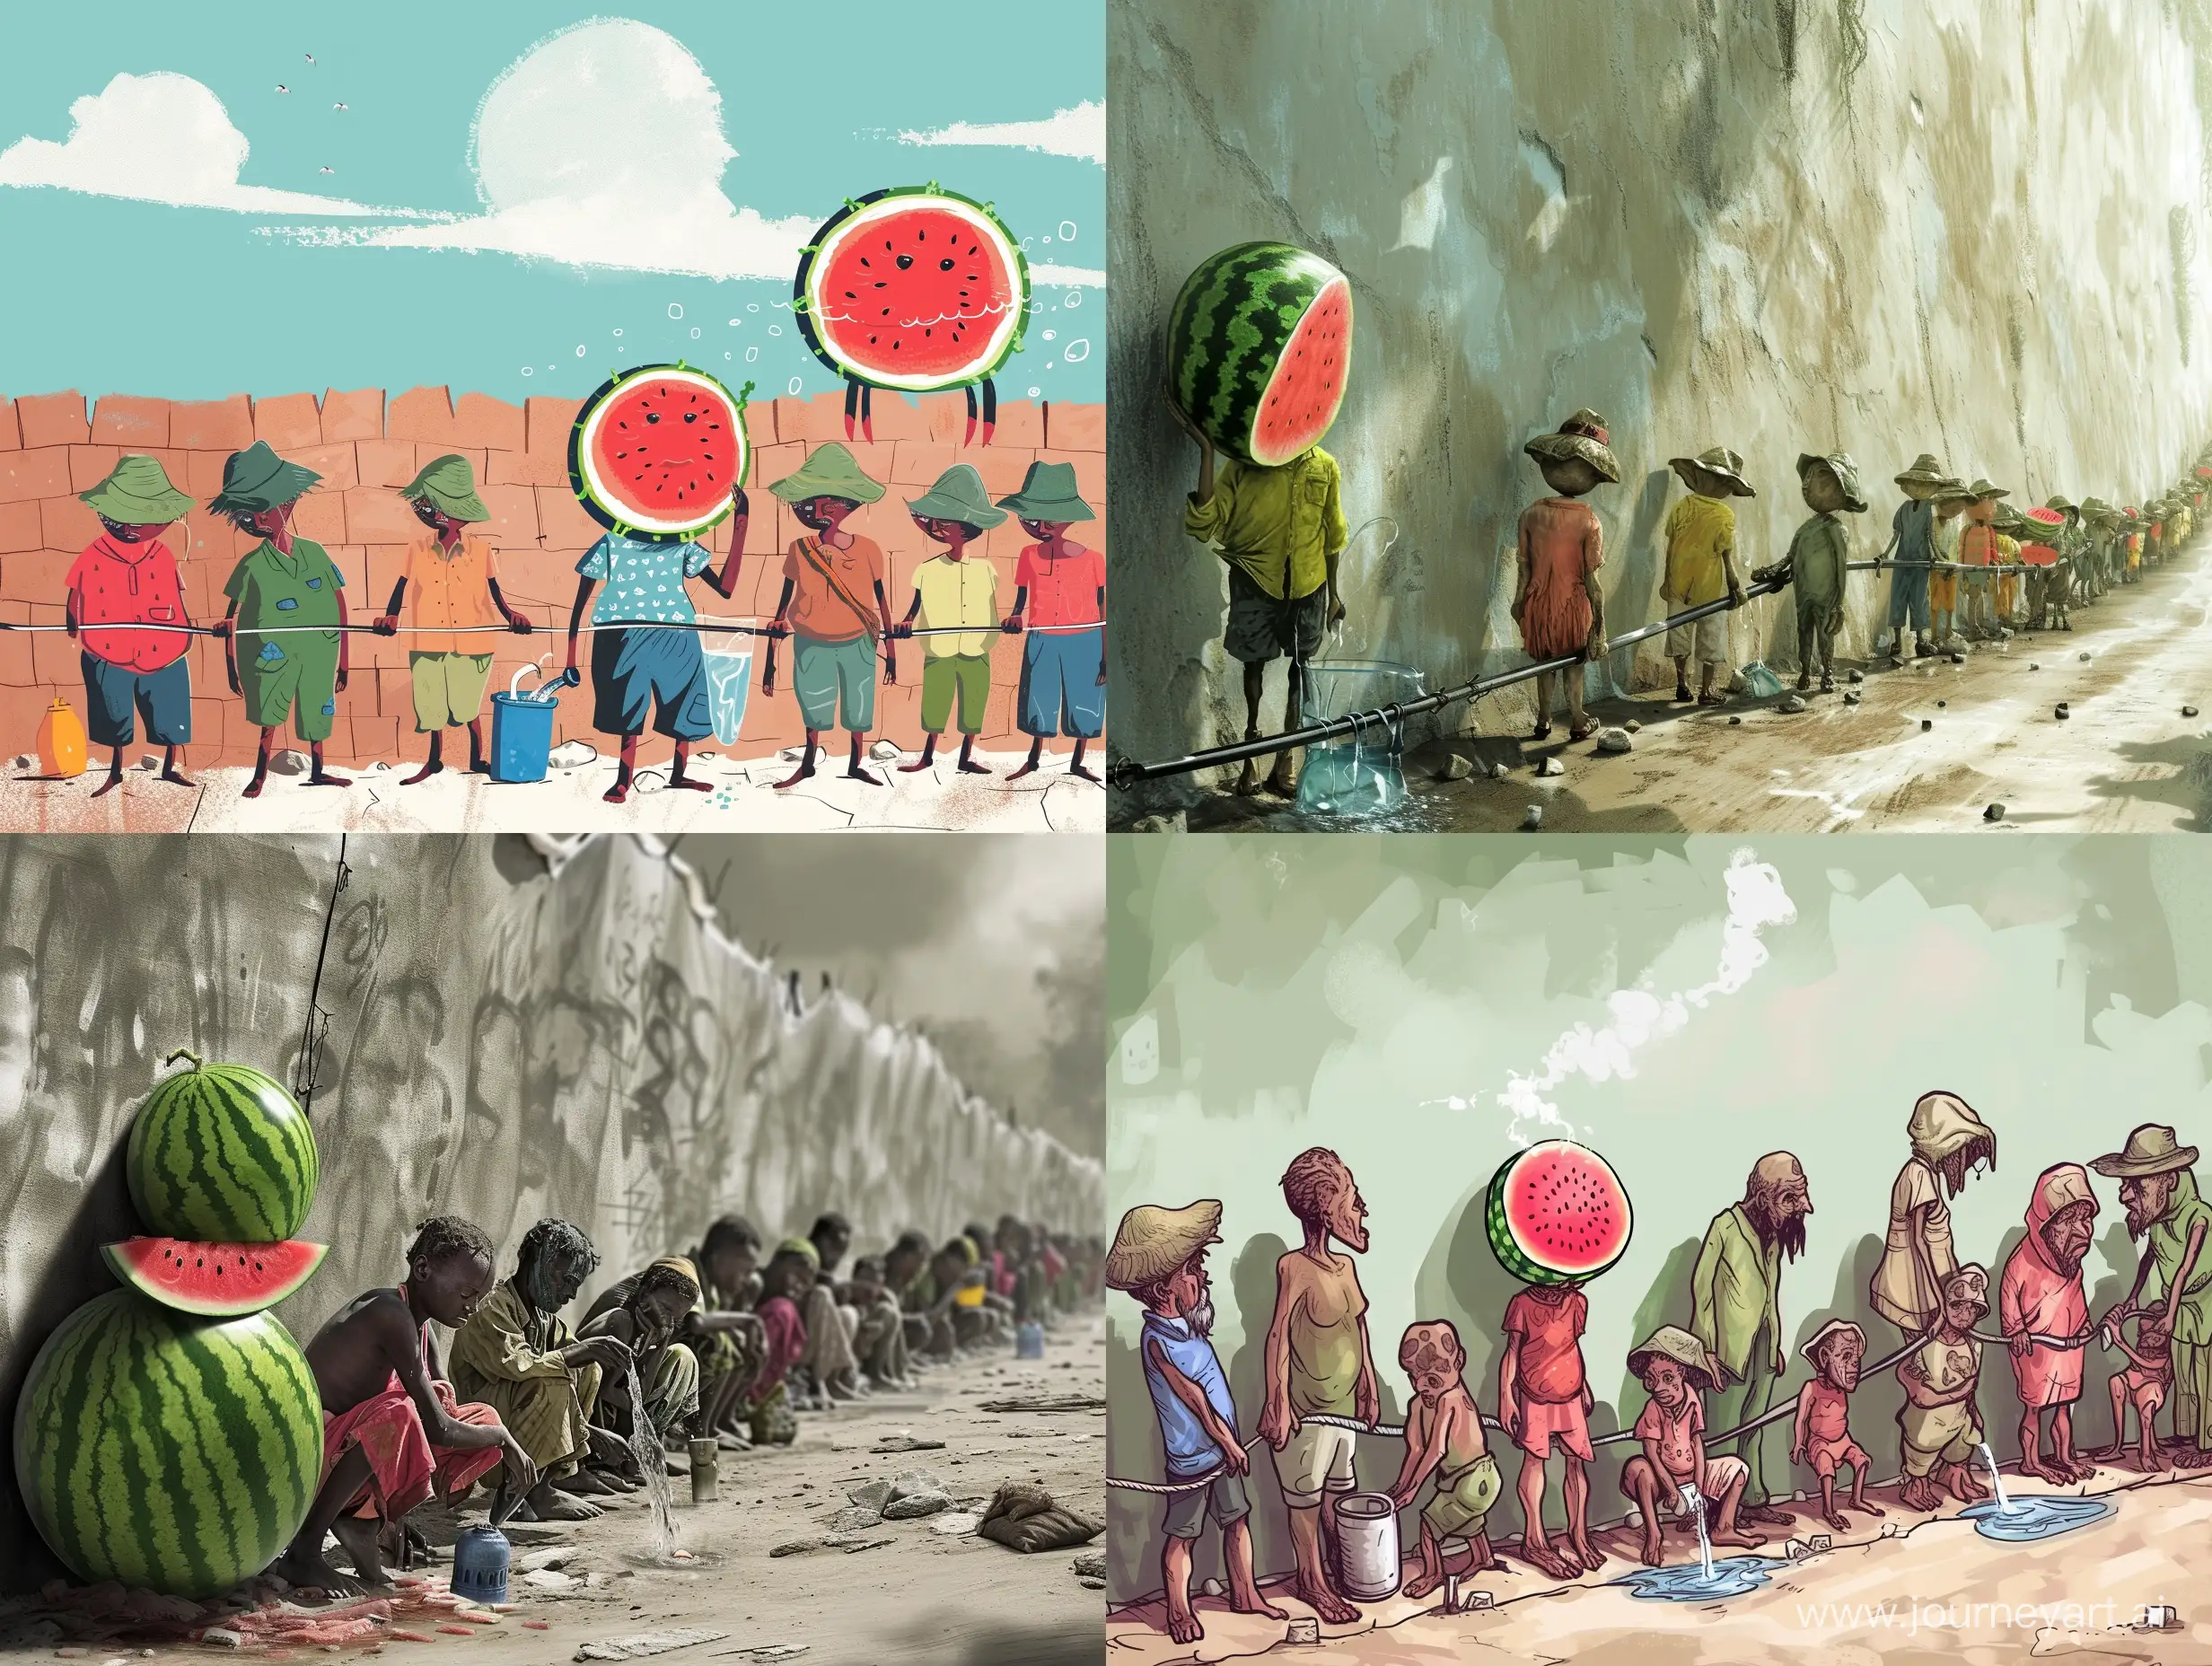 Diverse-Community-Sharing-Hope-WatermelonHeaded-Individuals-in-Poverty-Line-Receive-Water